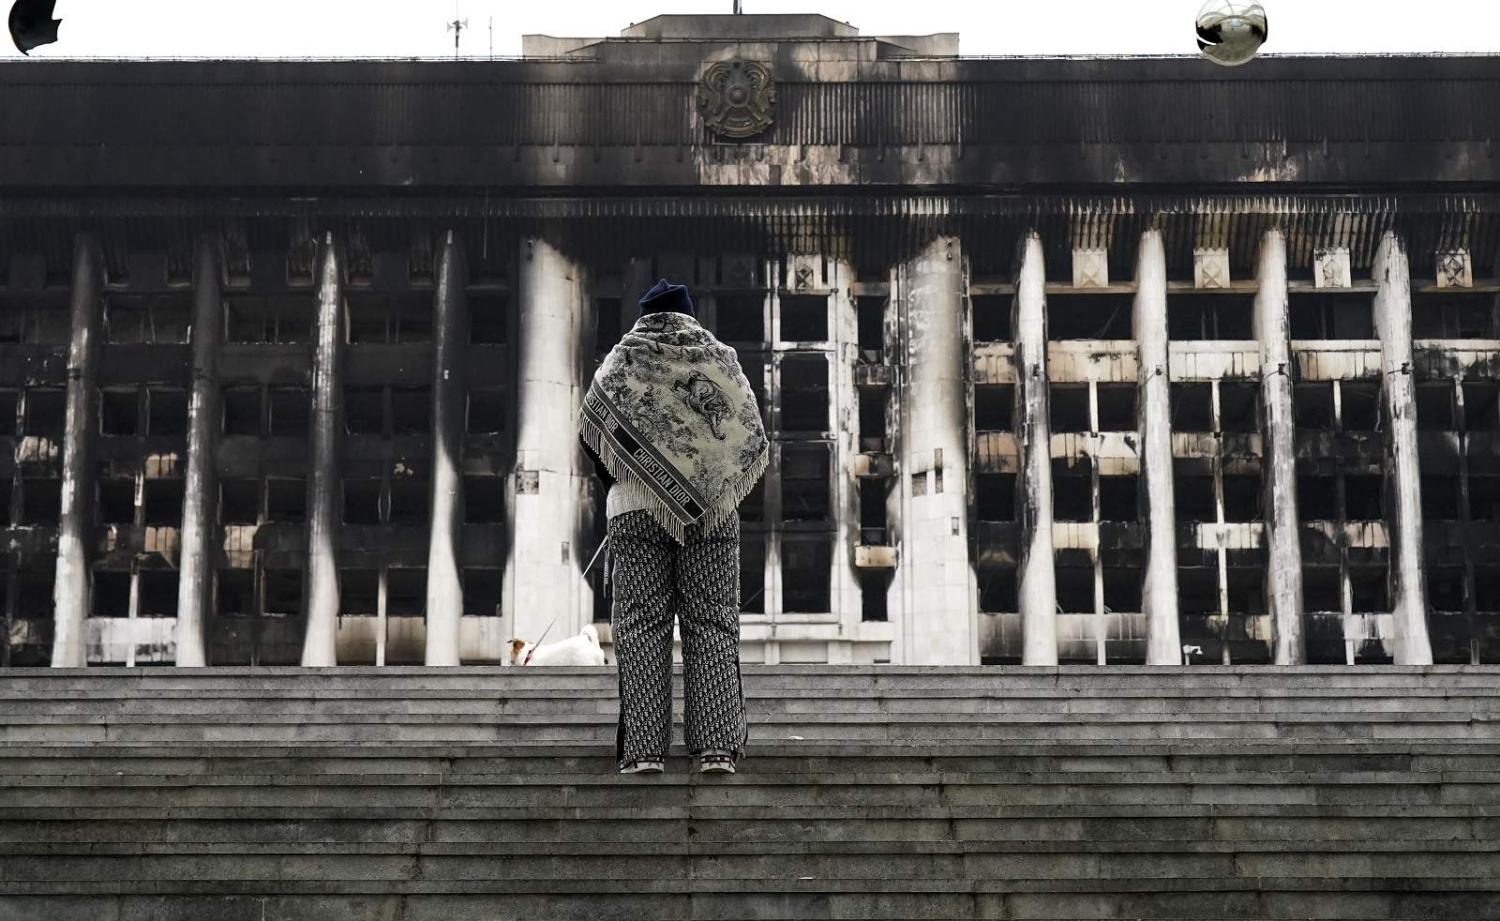 The aftermath of protests in Almaty, Kazakhstan, 11 January 2022 (Pavel Pavlov/Anadolu Agency via Getty Images)